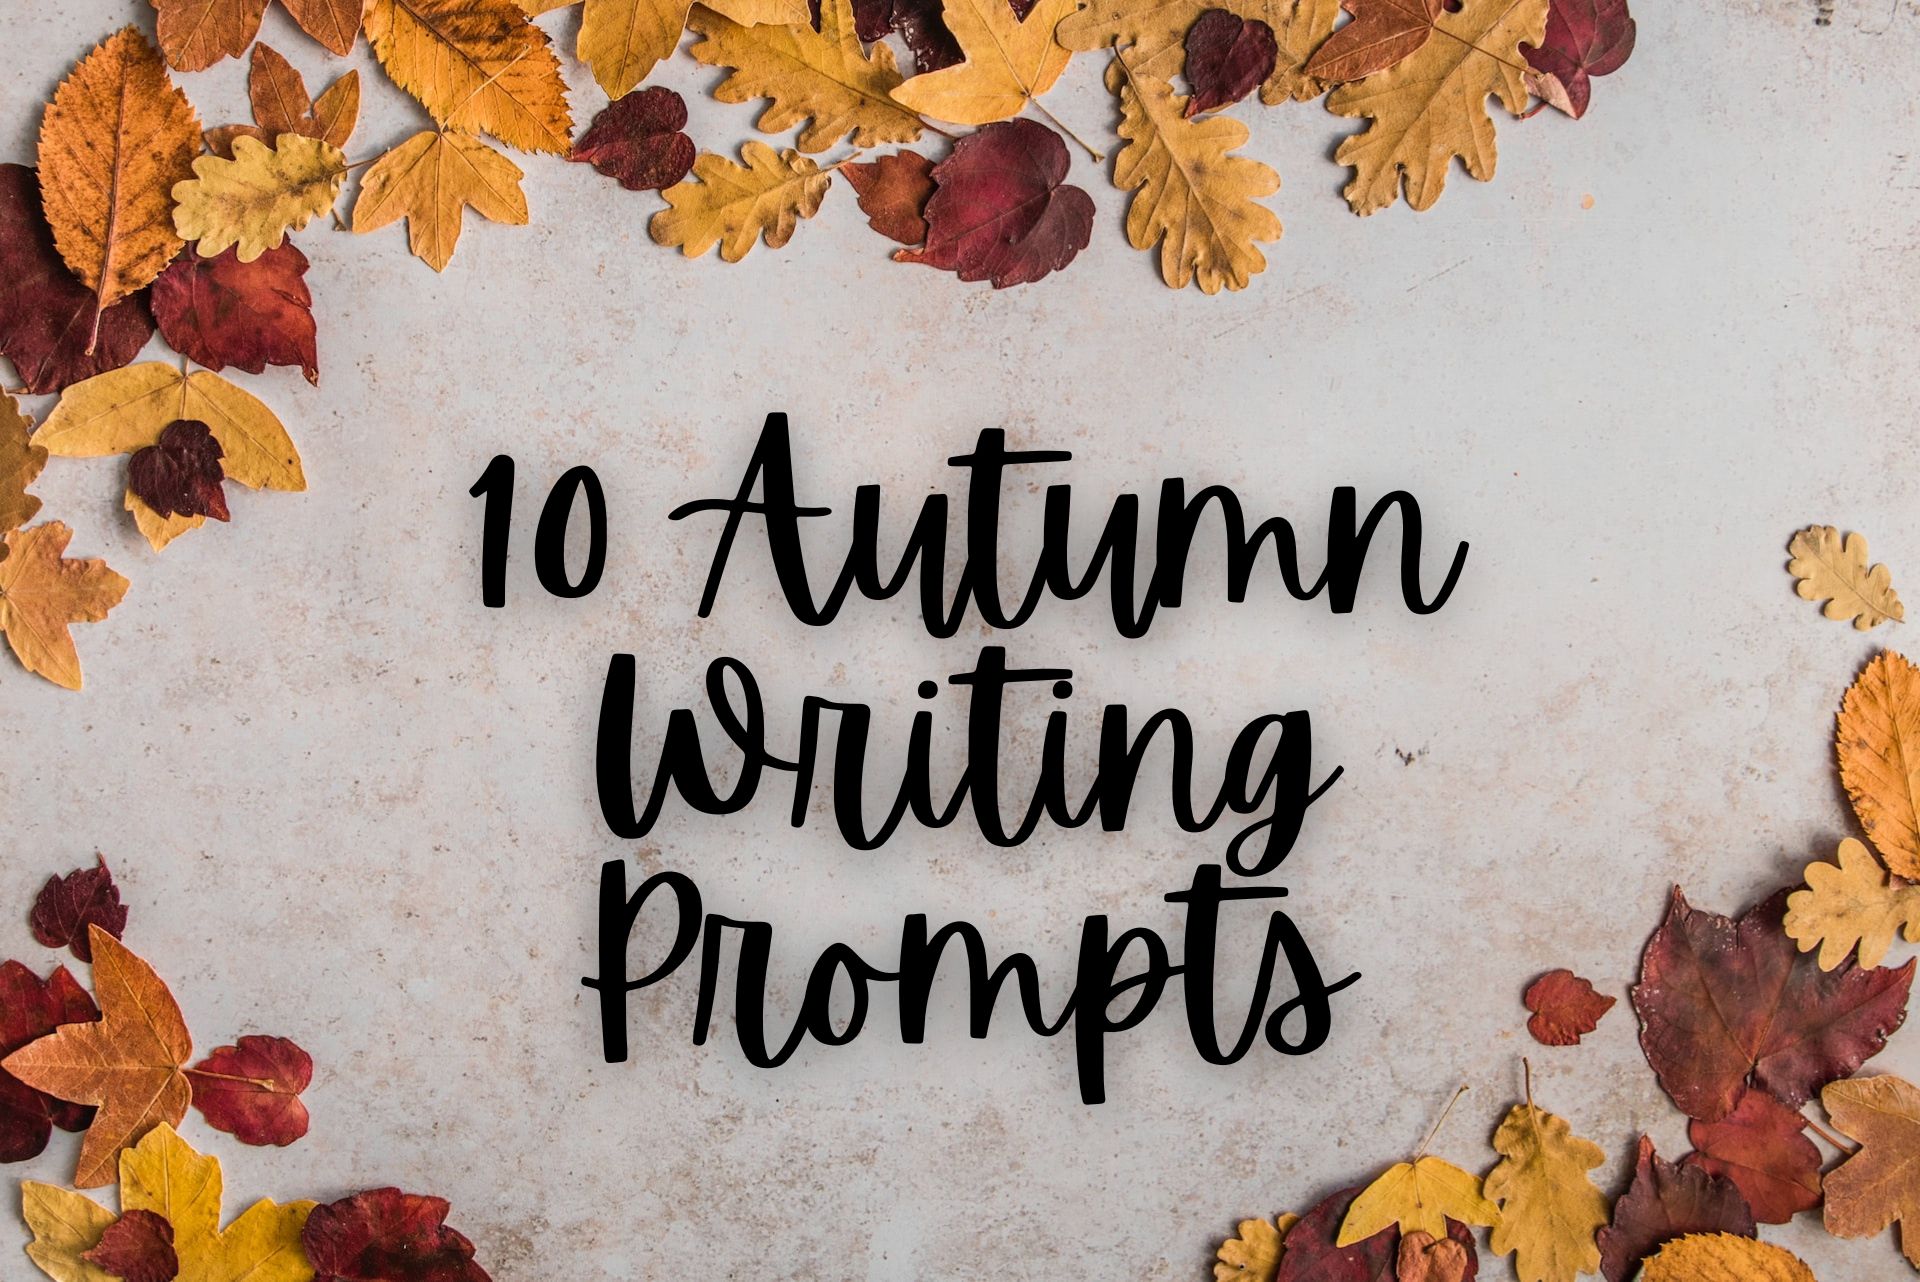 10 Autumn Writing Prompts